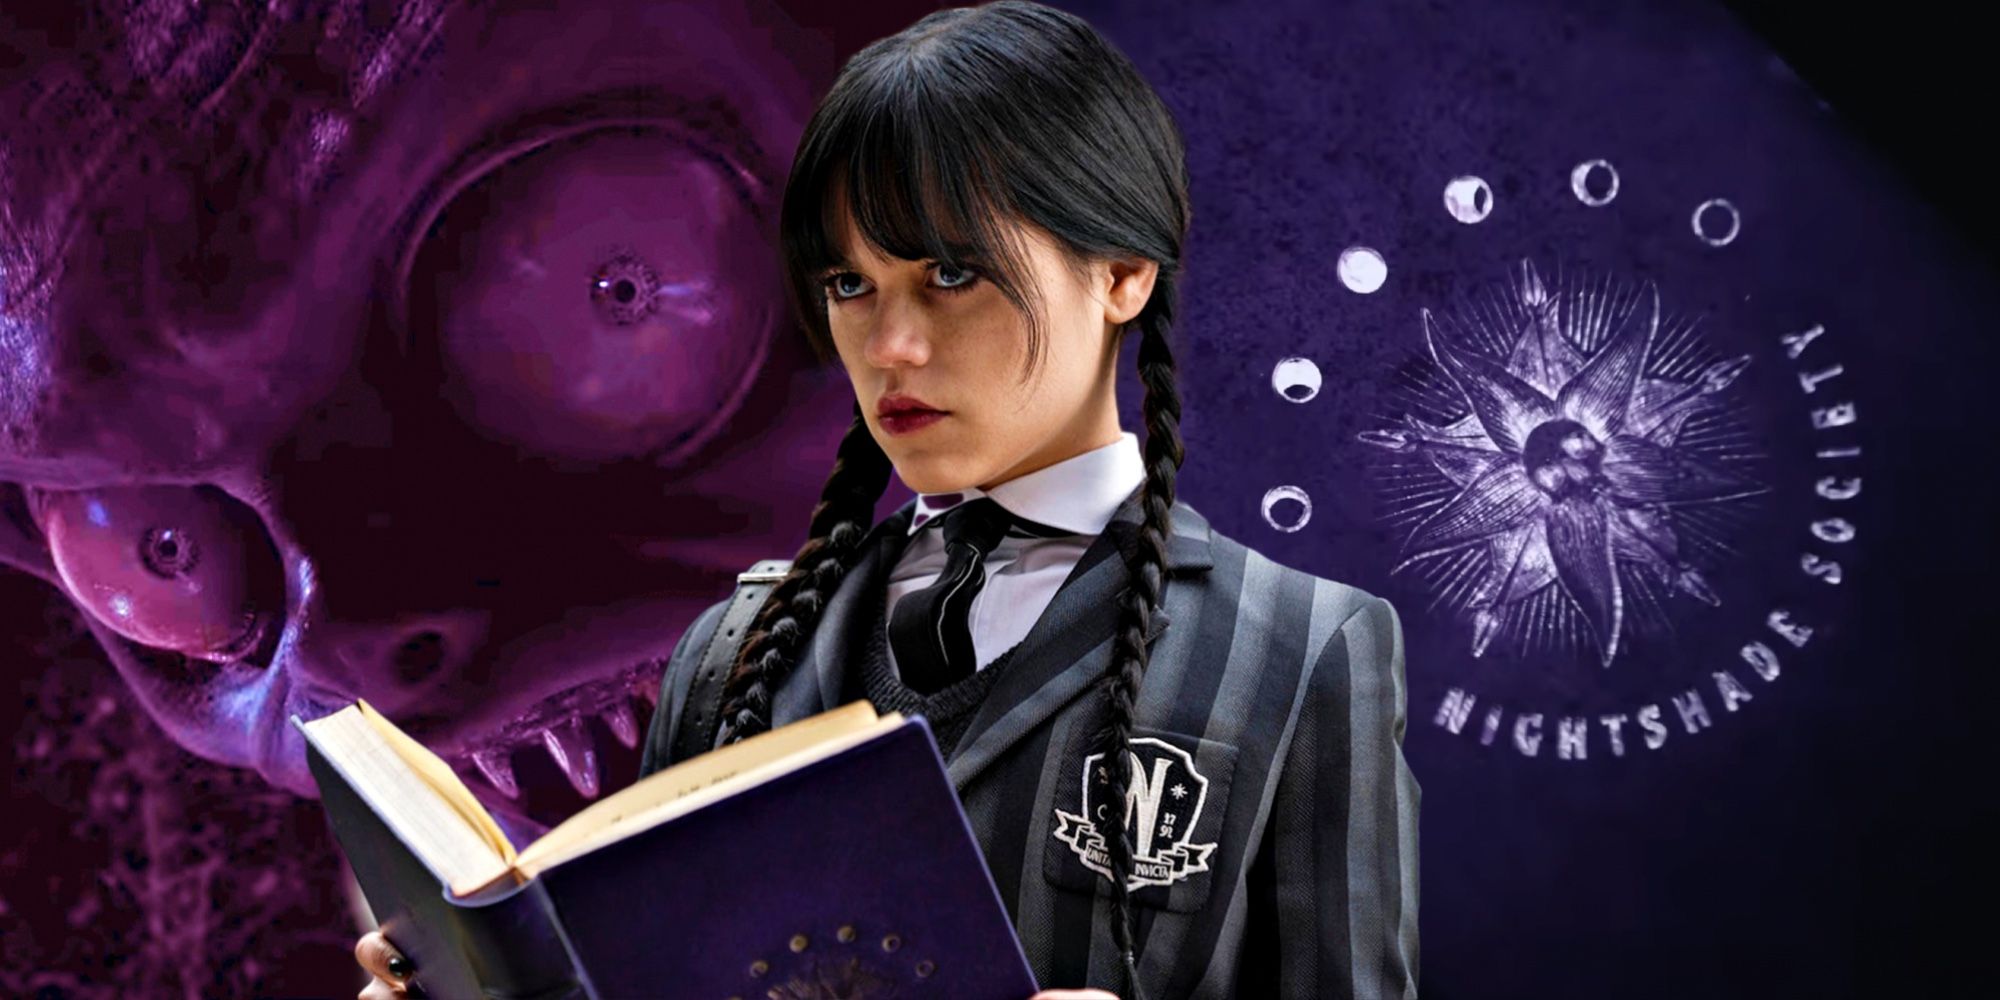 Wednesday misses the Addams Family's point, but found its perfect star